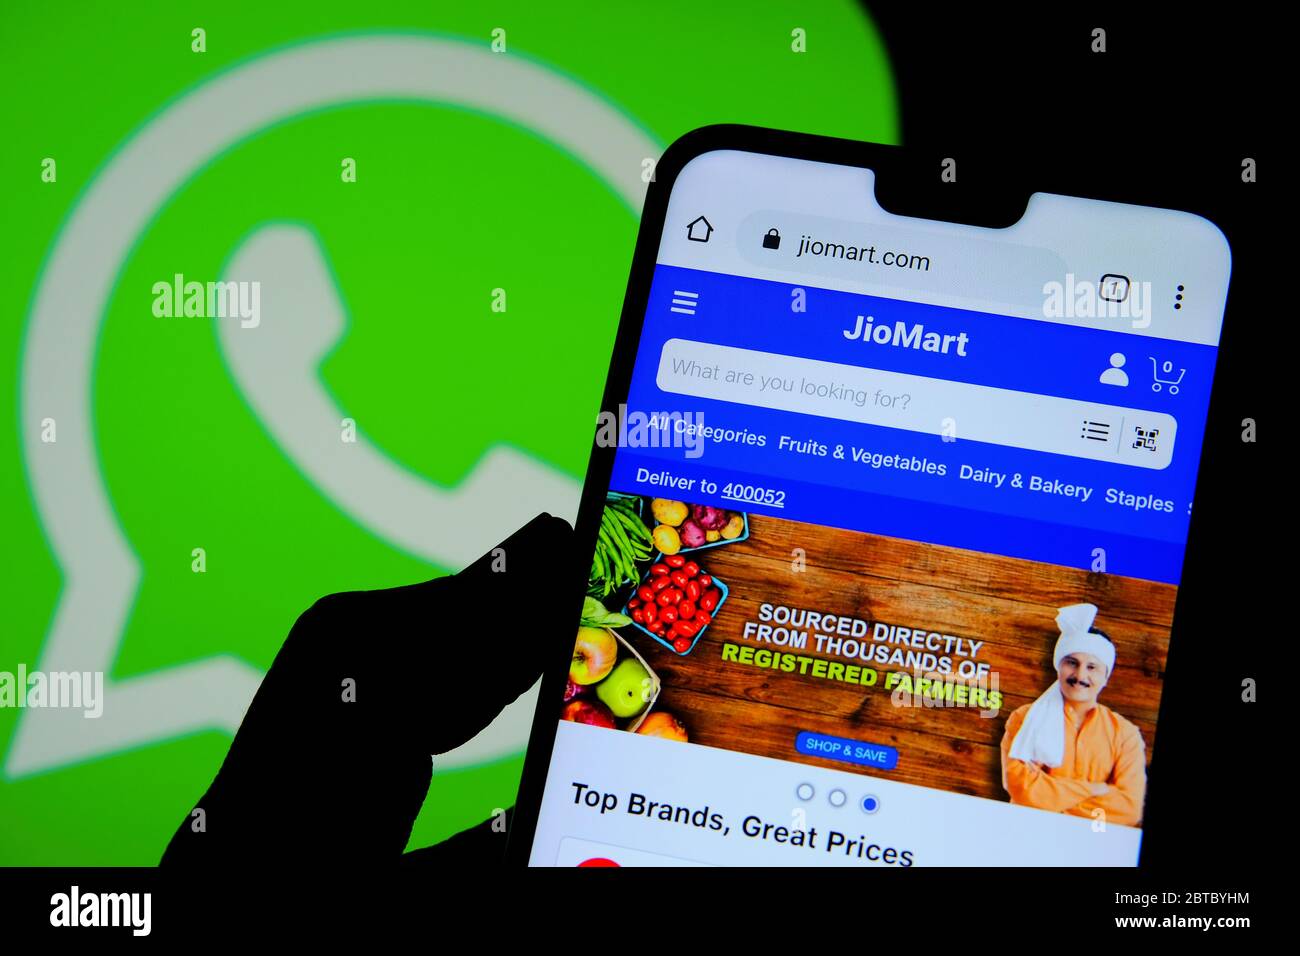 Stone / United Kingdom - May 24 2020: JioMart grocery shop seen on the smartphone screen and Whatsapp logo on a blurred background. The new service la Stock Photo